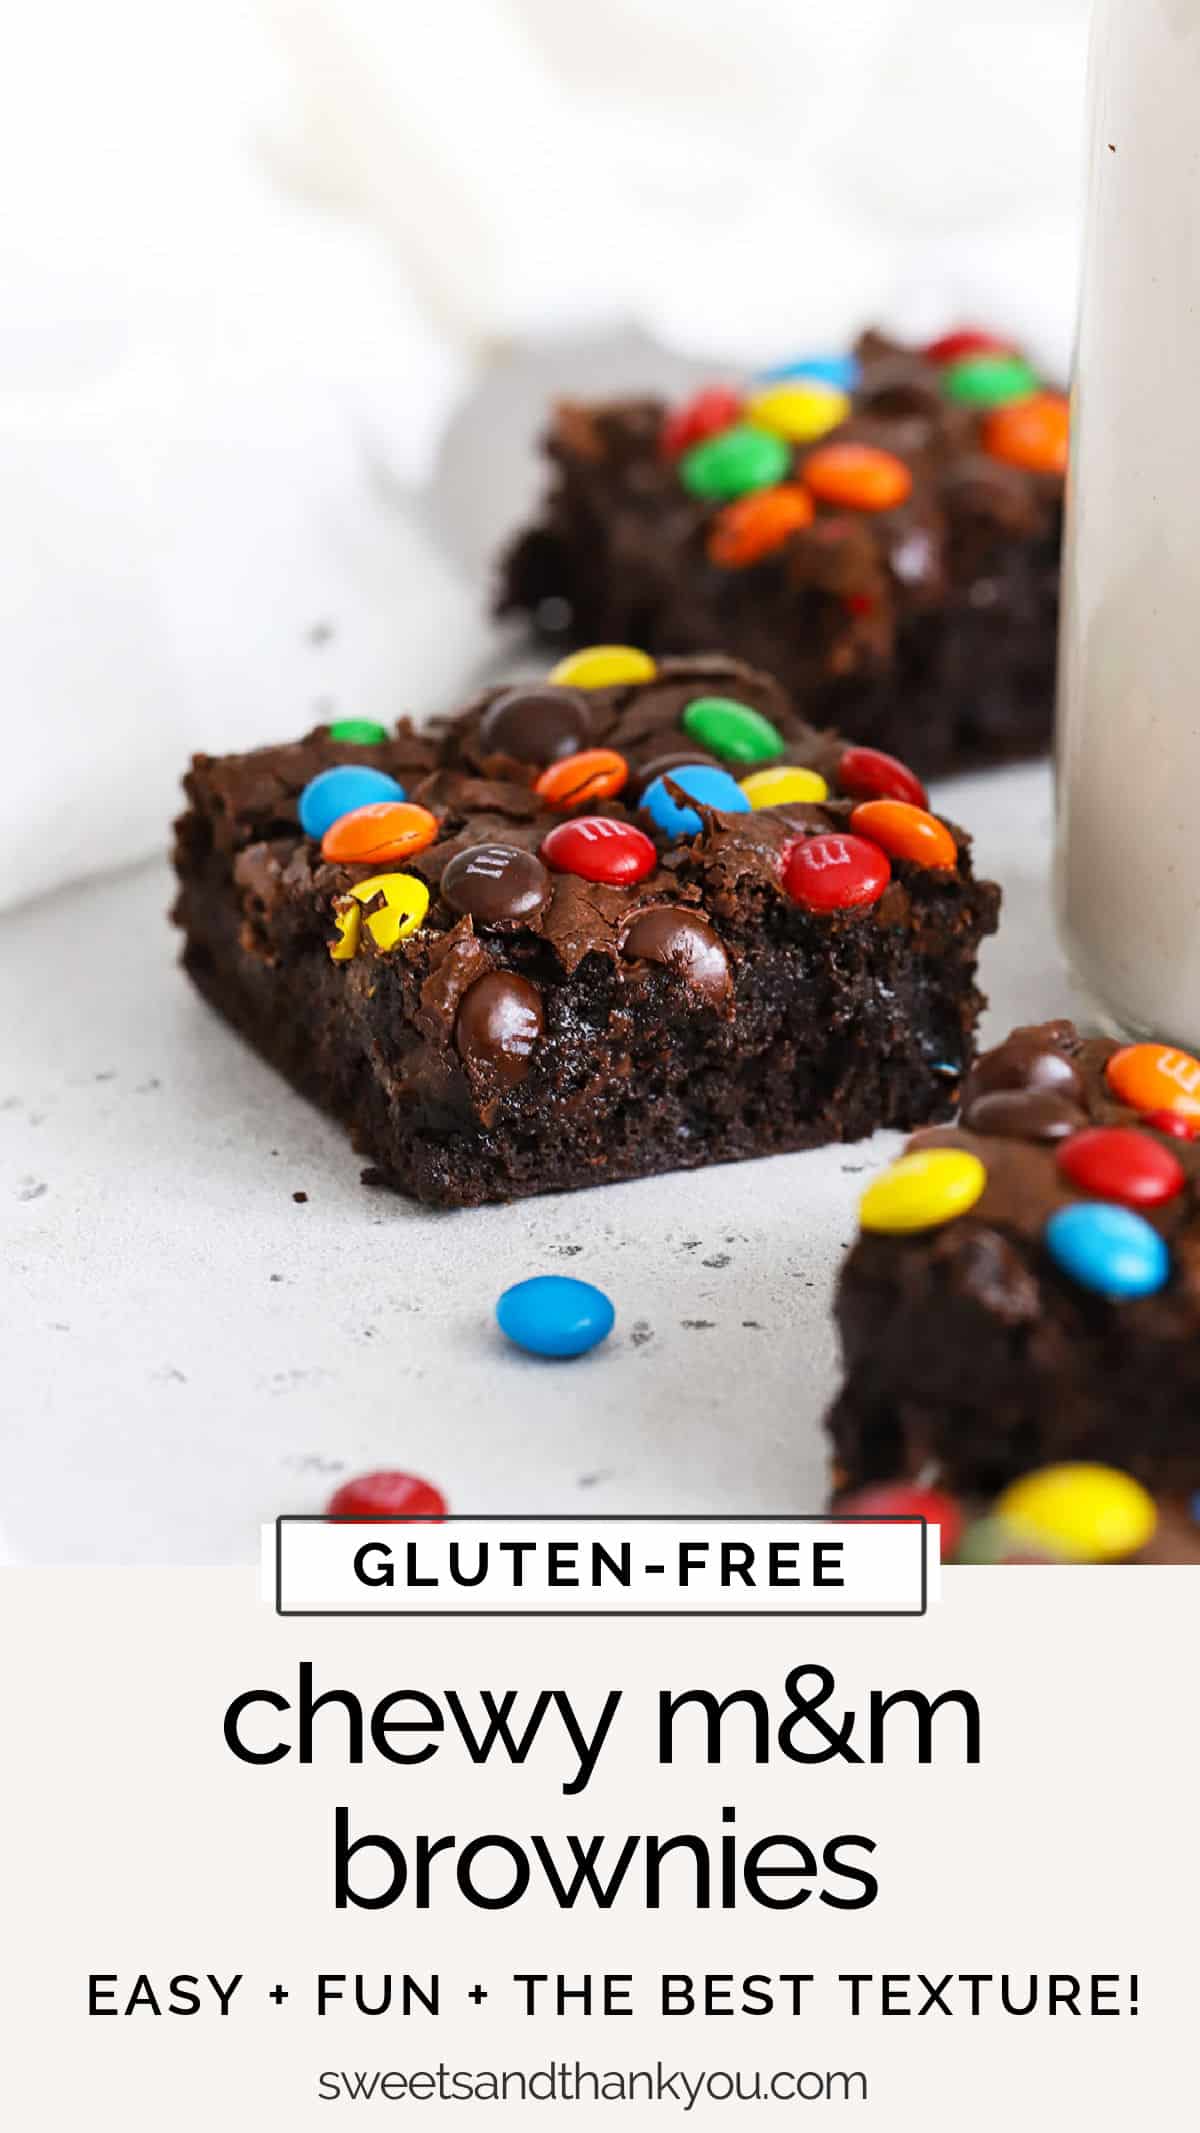 Gluten-Free M&M Brownies - Chewy gluten-free brownies topped with colorful M&Ms! These are such a fun, easy gluten-free dessert! / Gluten-Free mm brownies / gluten-free M&M brownie recipe, easy gluten-free brownies / gluten-free brownies with m&ms / gluten-free m&m desserts / are m&ms gluten-free / 